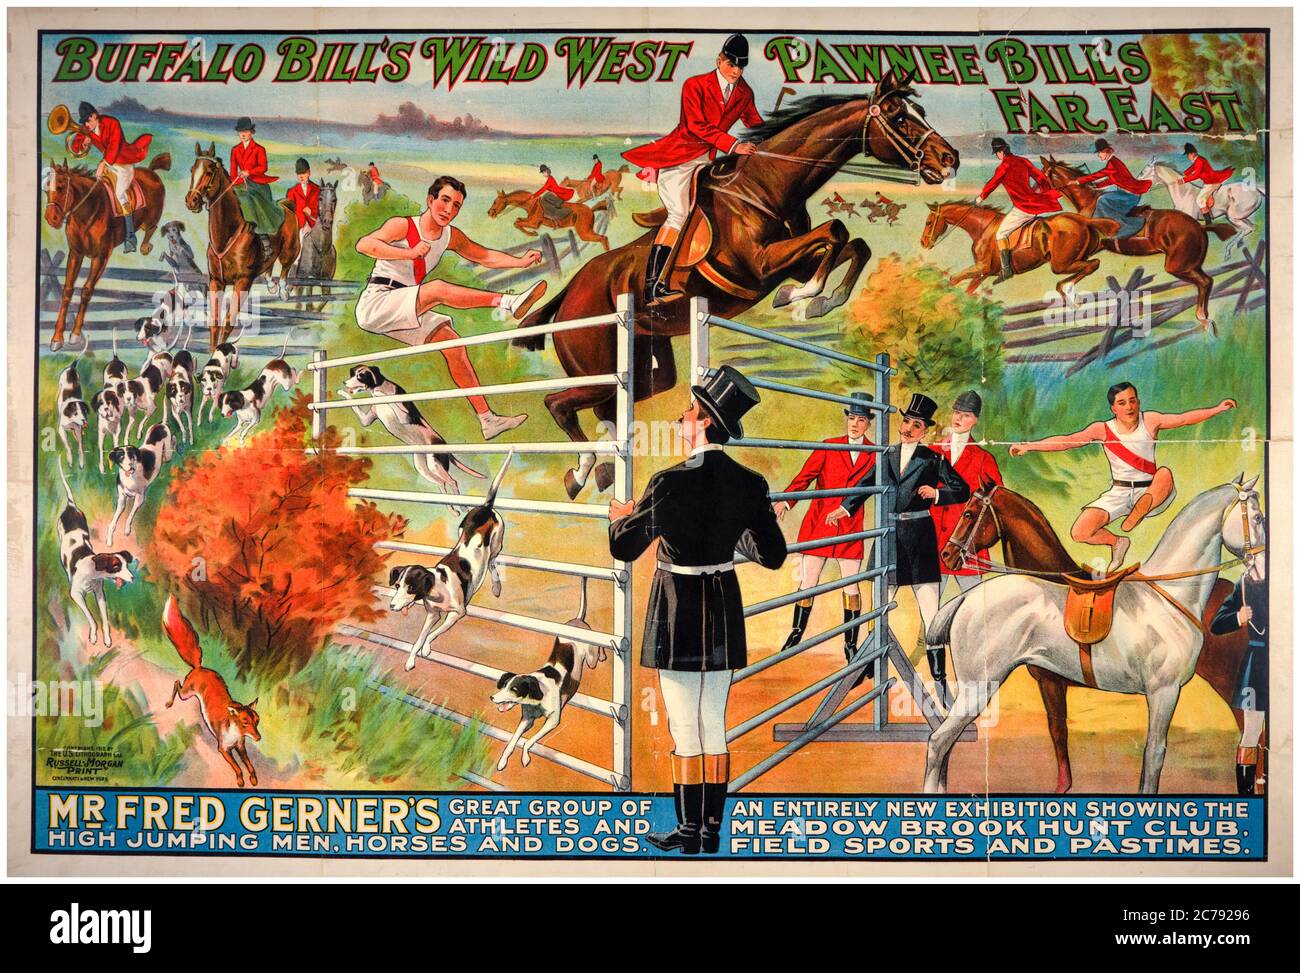 Buffalo Bill's Wild West and Pawnee Bill's Great Far East show, poster, 1912 Stock Photo